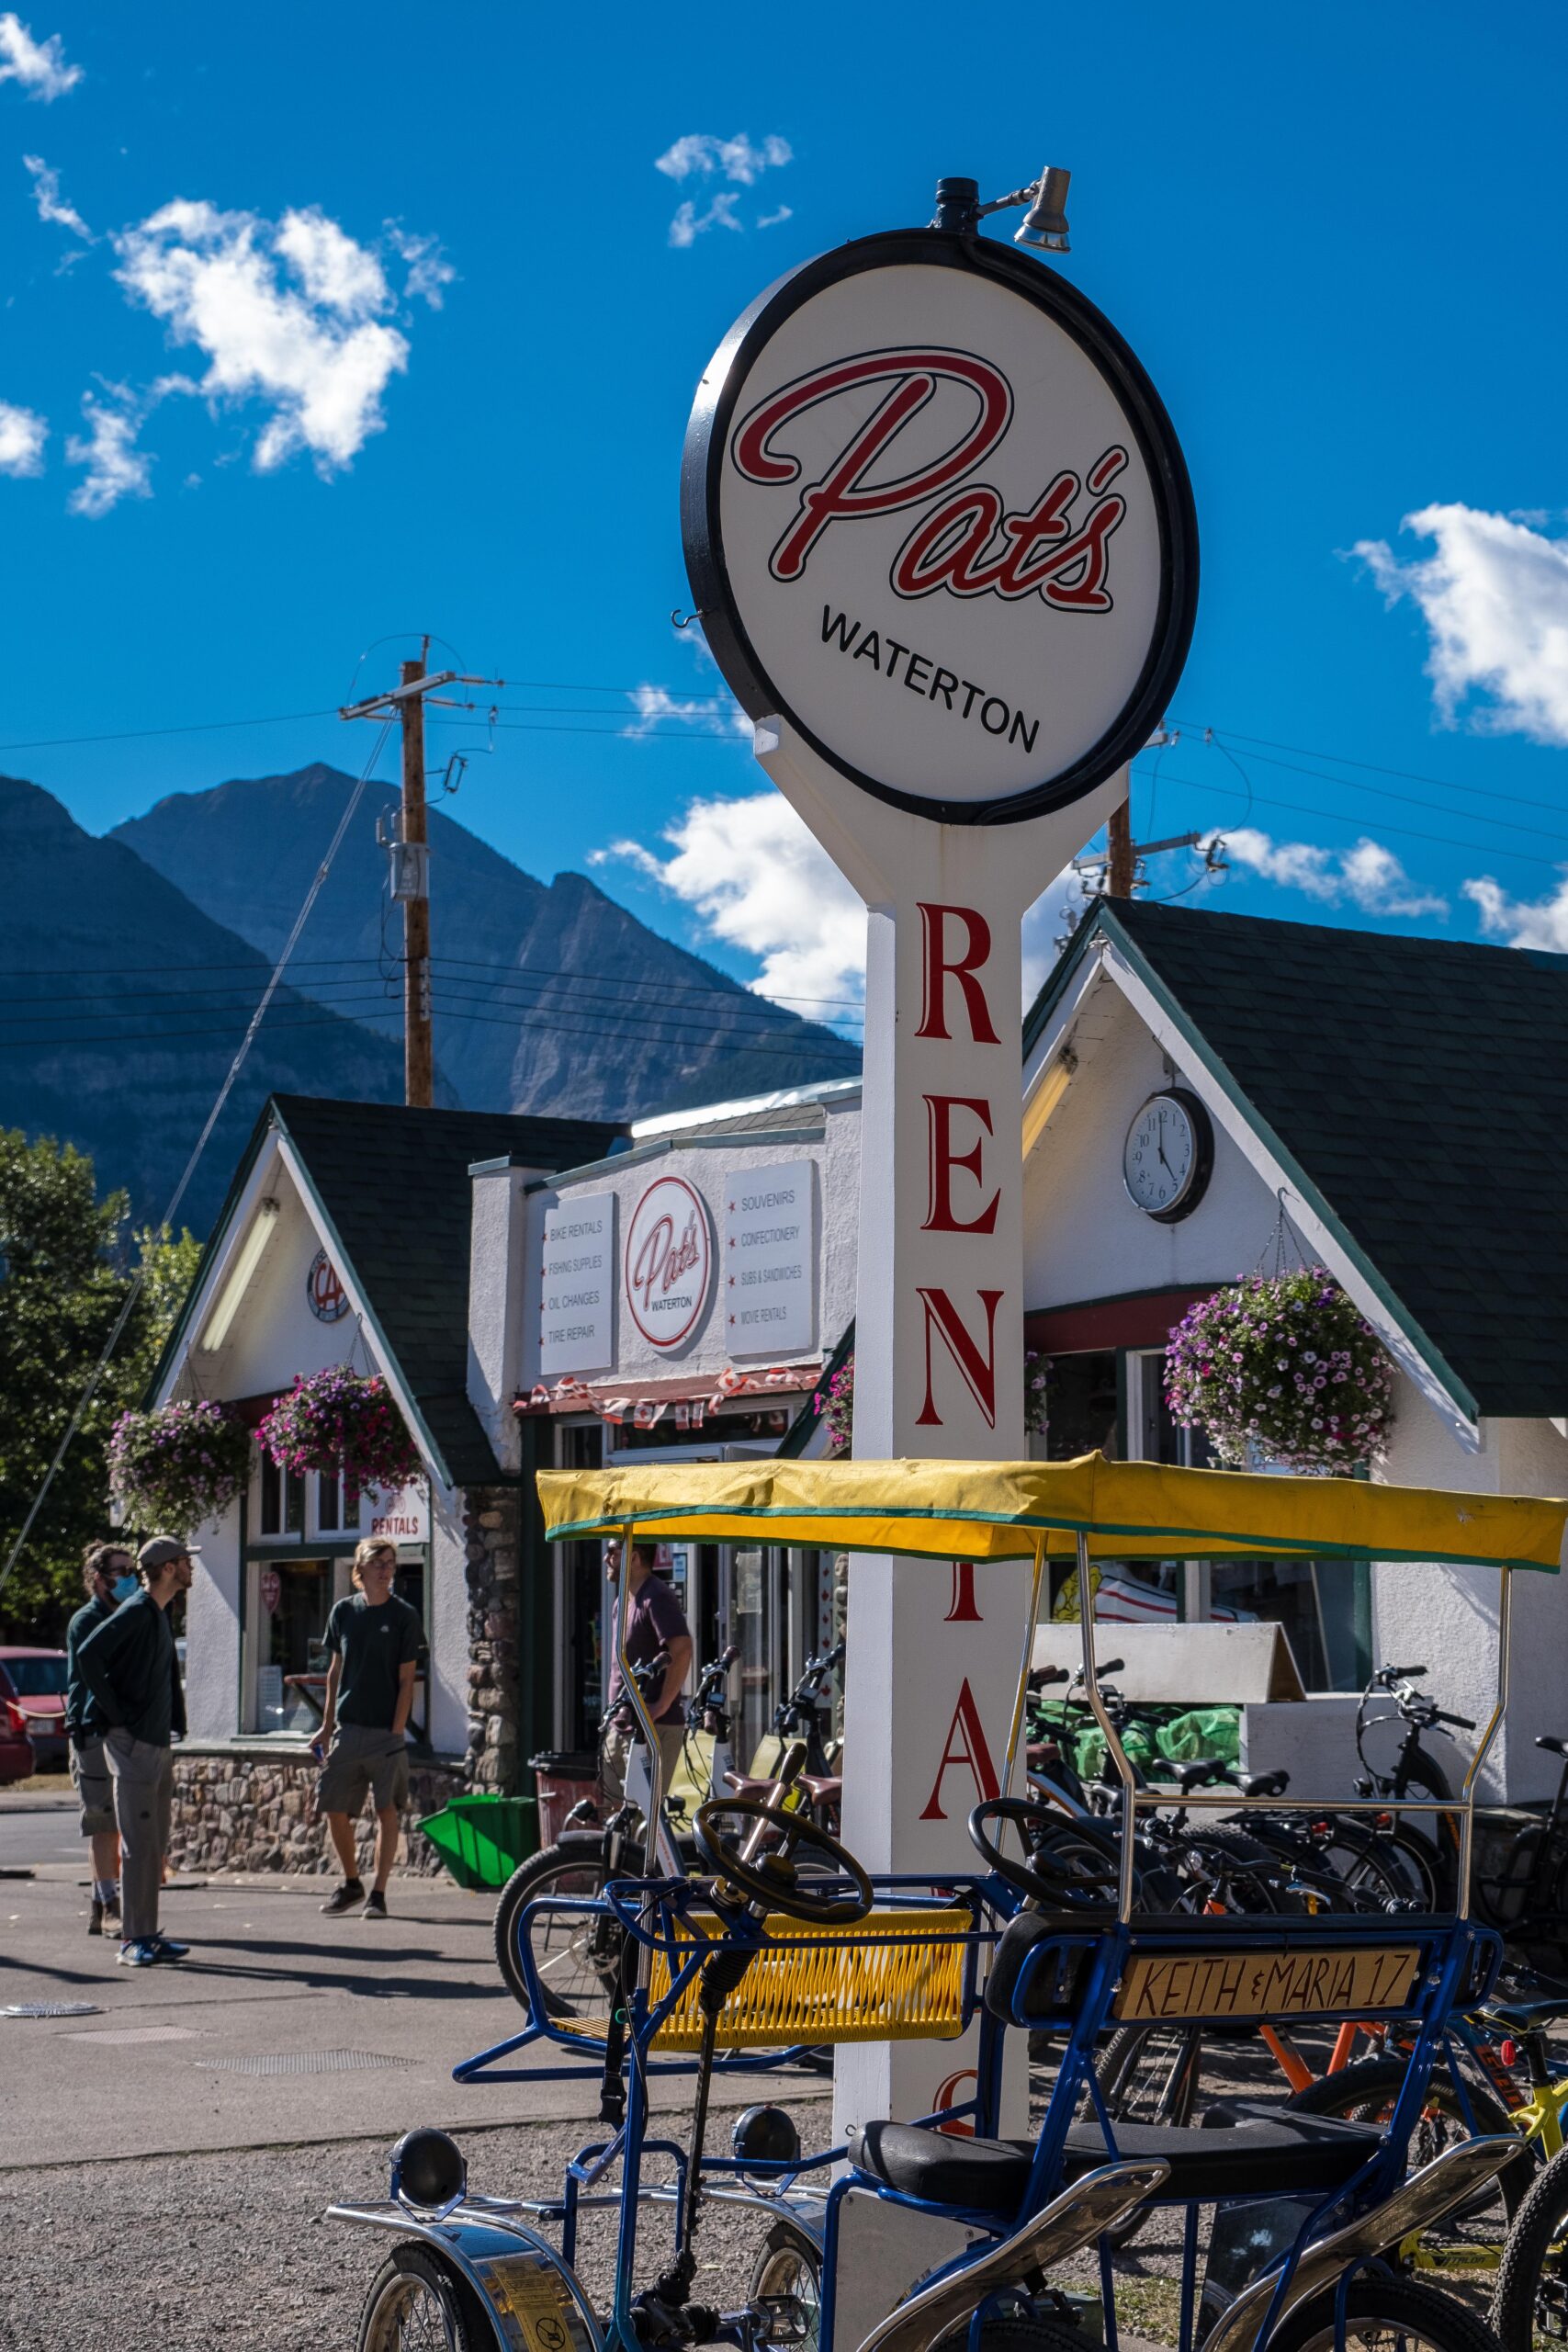 Downtown waterton on a nice summer day